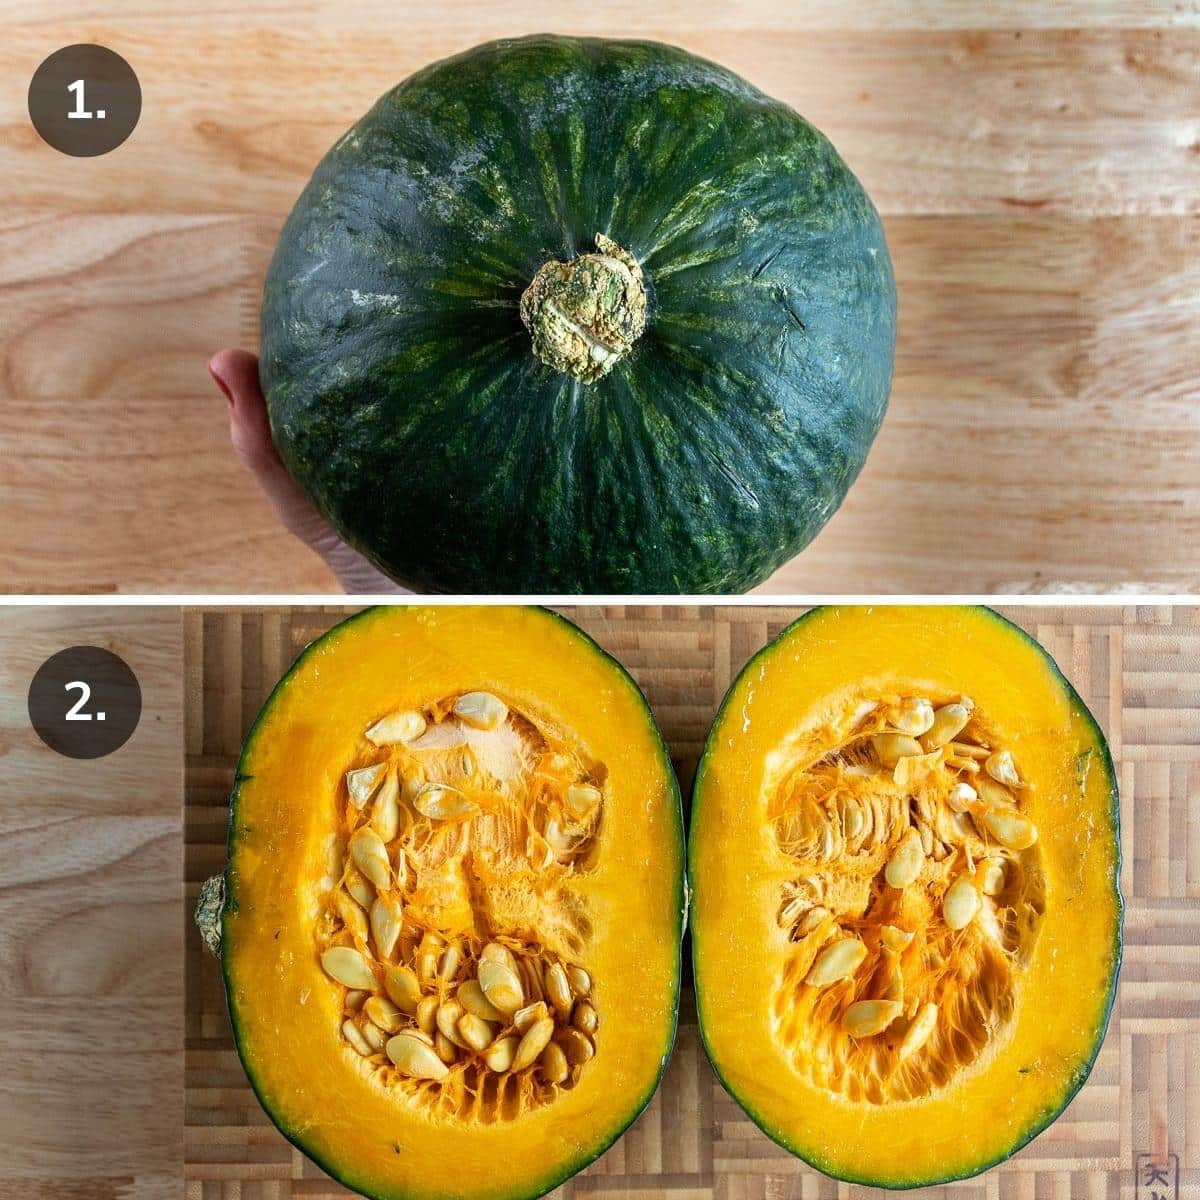 Whole kabocha squash and one in half showing the seeds.